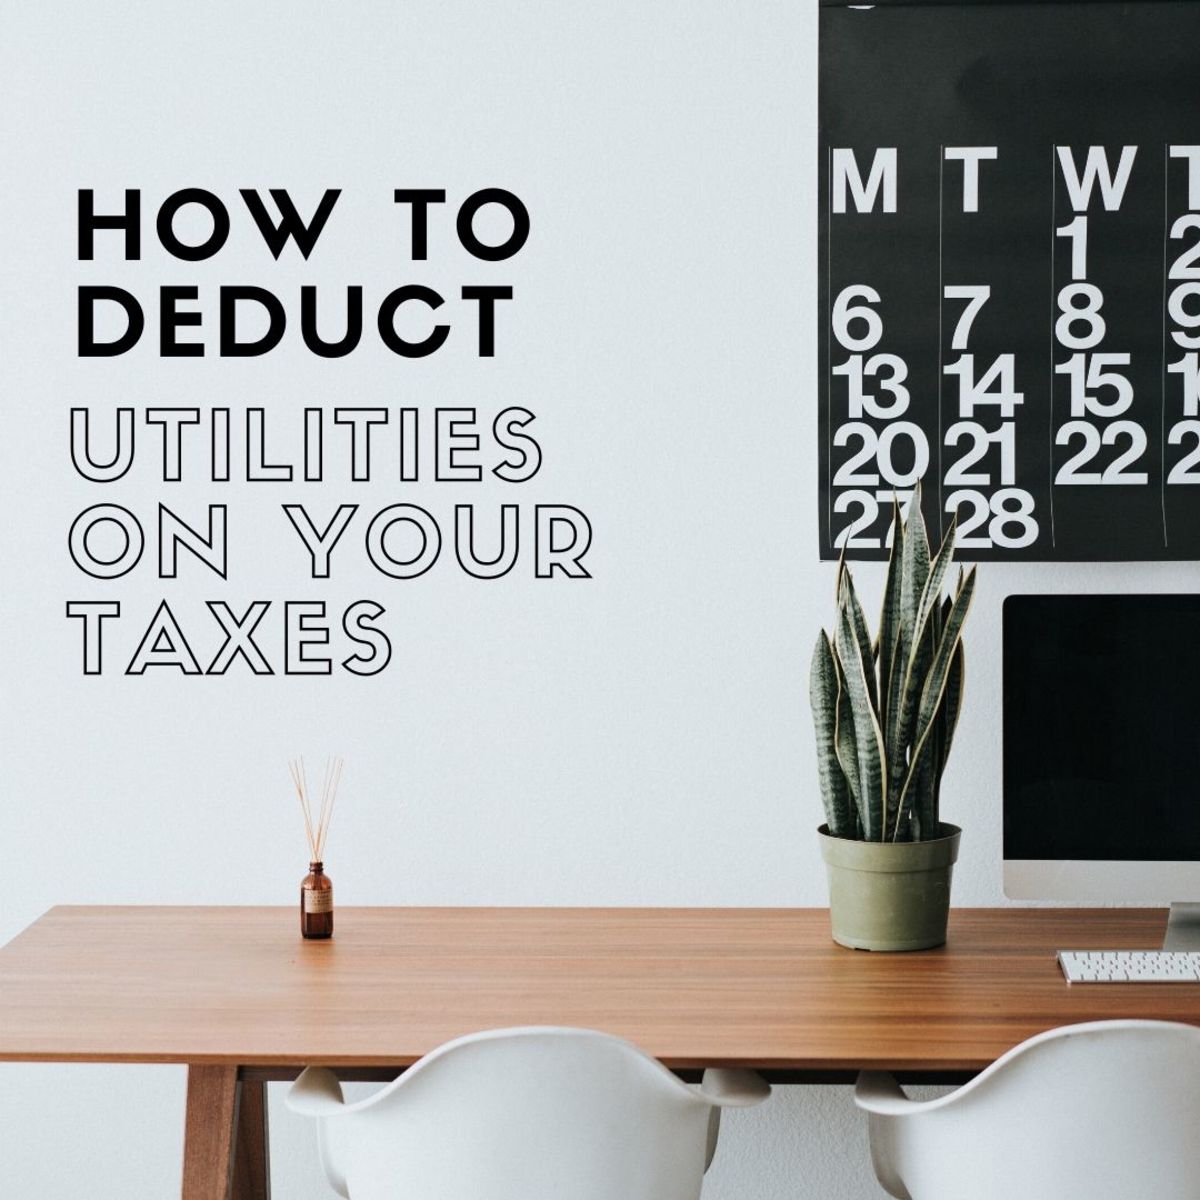 Do you use utilities, cell phone, and internet at home for your business? Learn how to deduct these expenses from your taxes here.